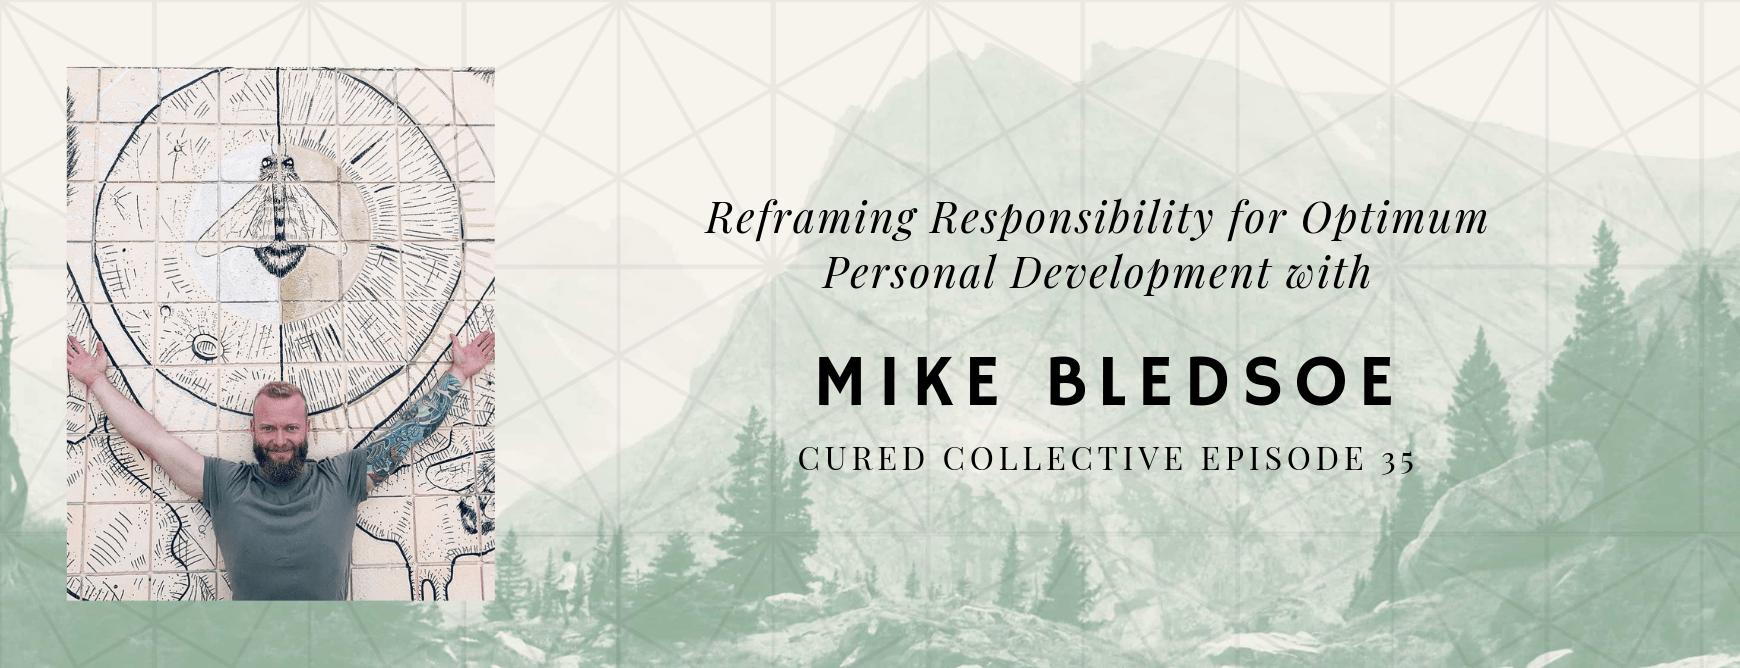 Cured Collective CBD Podcast with Mike Bledsoe